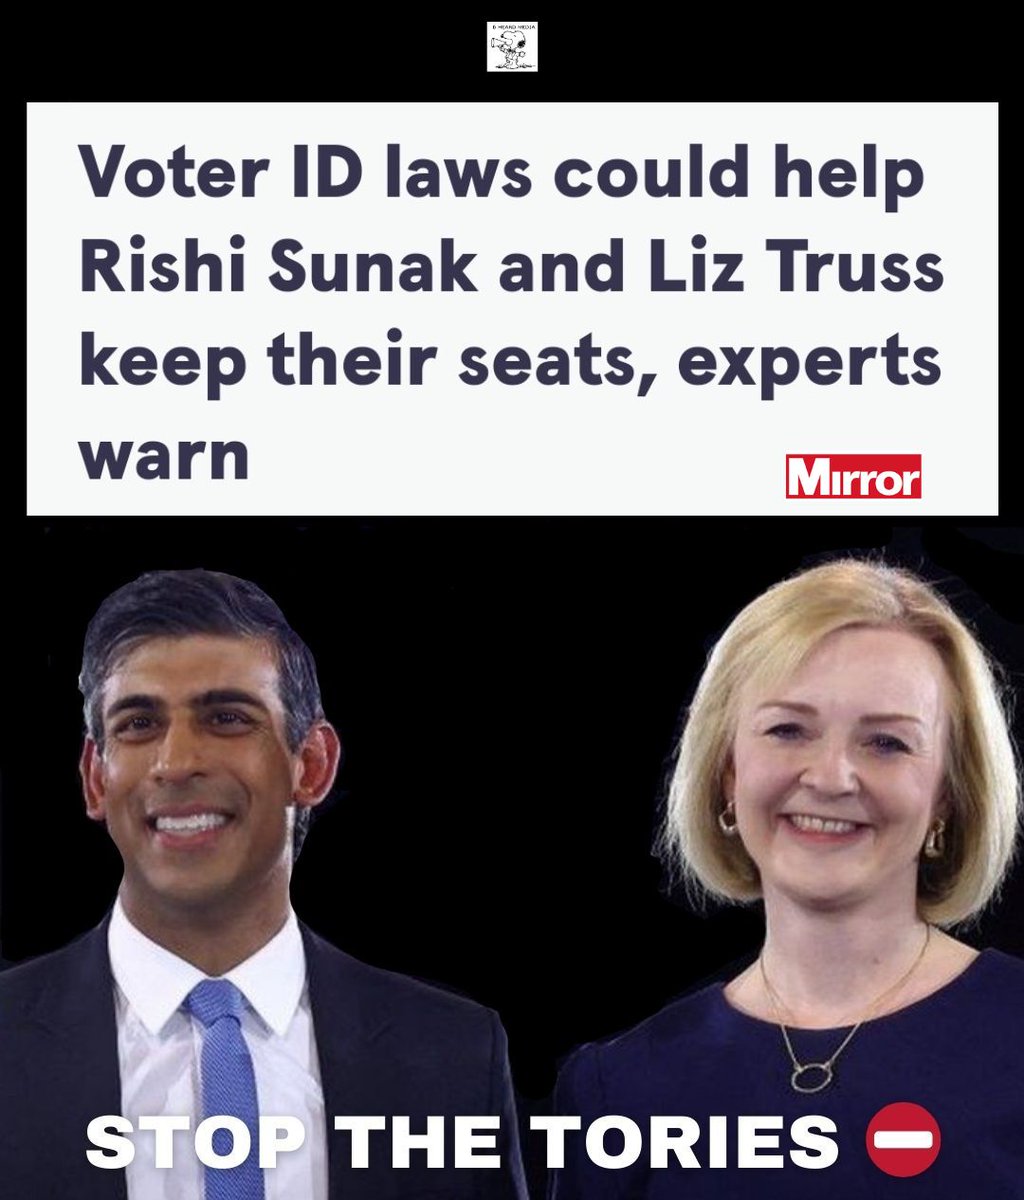 Voter ID laws could help Rishi Sunak & Liz Truss keep their seats!

16% of voters don't know they have to show acceptable types of ID

Enough for Sunak to keep his seat!

Just 0.1 per cent of voter fraud allegations since 2017 led to a conviction!

#StopTheTories ⛔️
#ToriesOut646